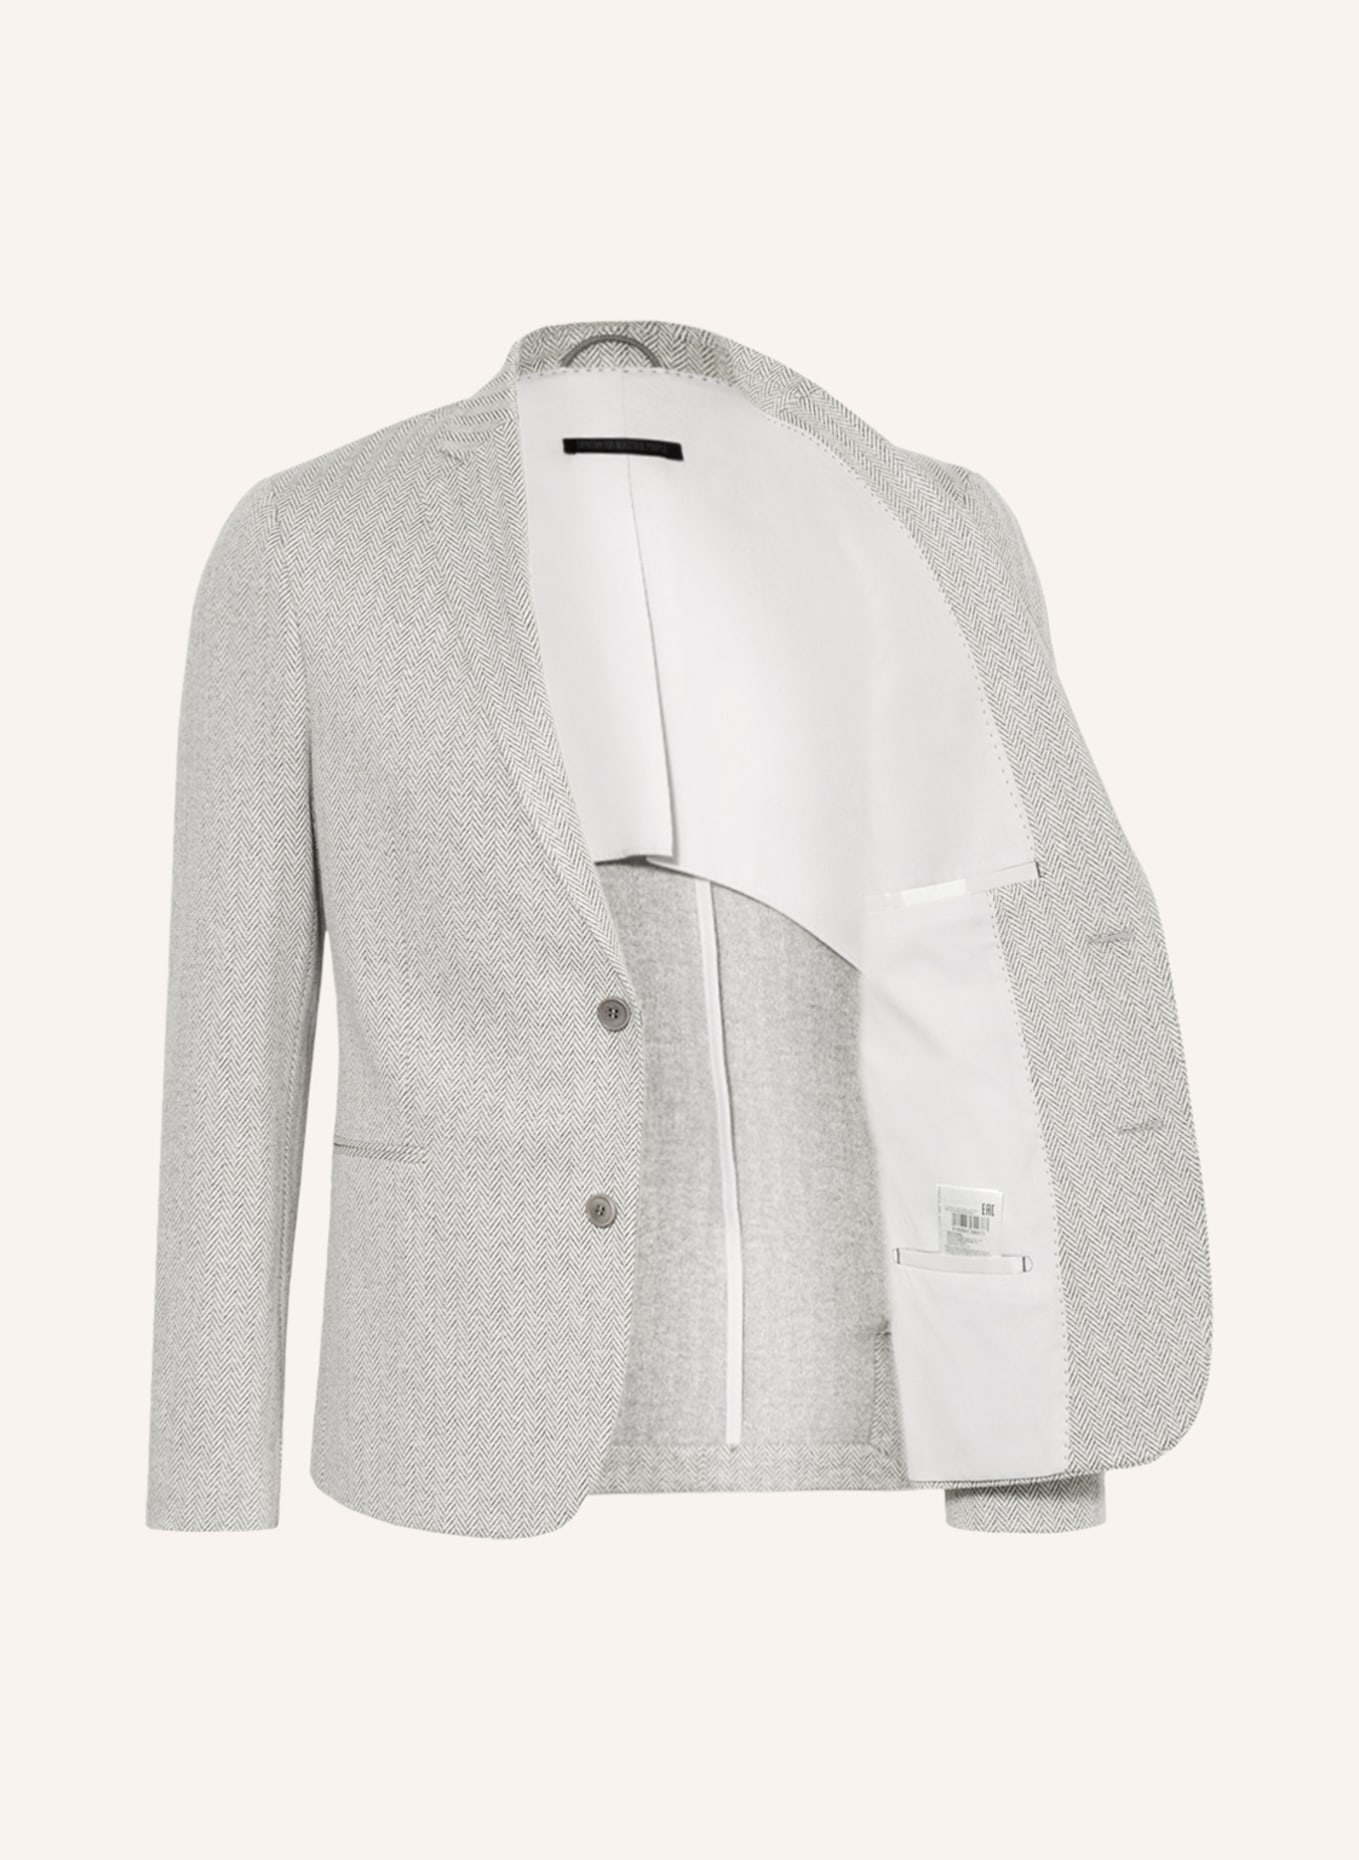 DRYKORN Suit jacket HURLEY extra slim fit, Color: GRAY/ LIGHT GRAY (Image 4)